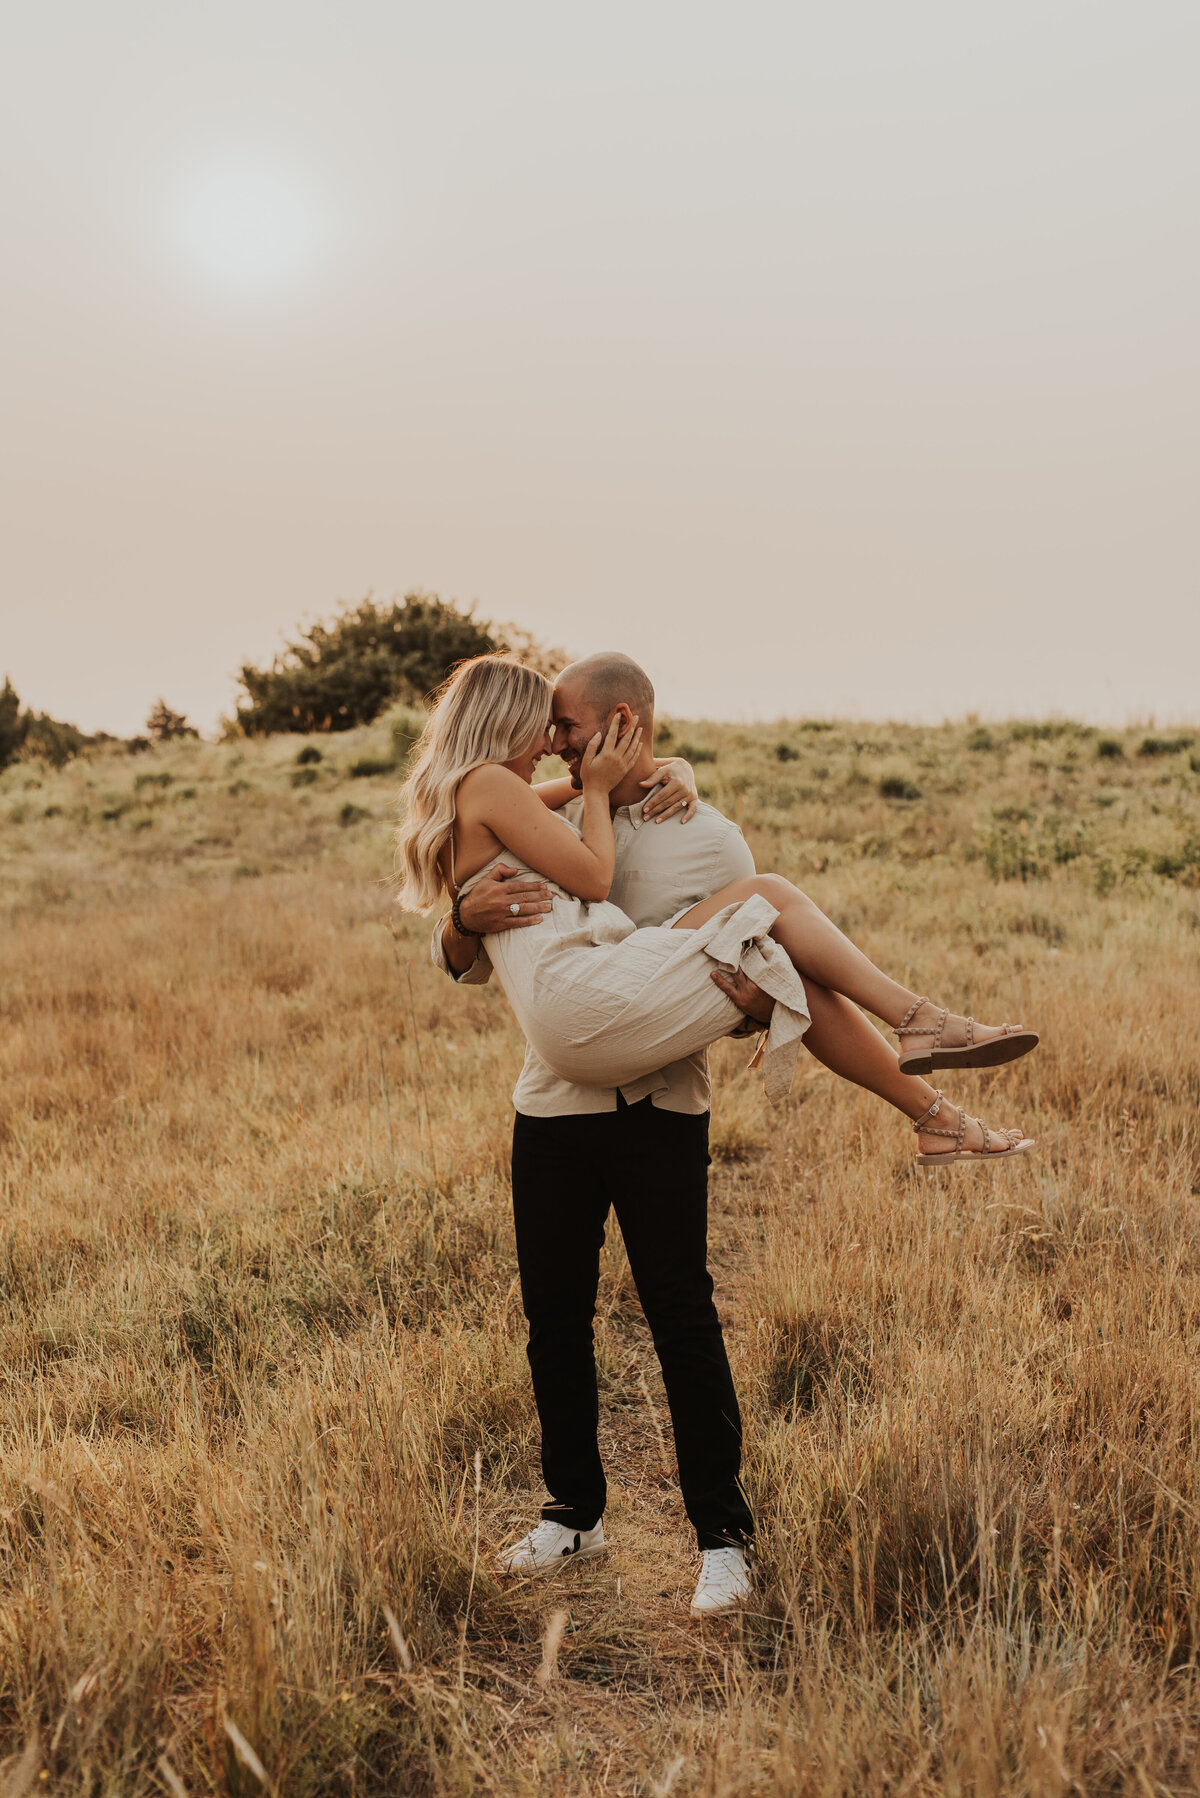 megan-and-andré-engagement-session-at-arbor-hills-nature-preserve-texas-by-bruna-kitchen-photography-118